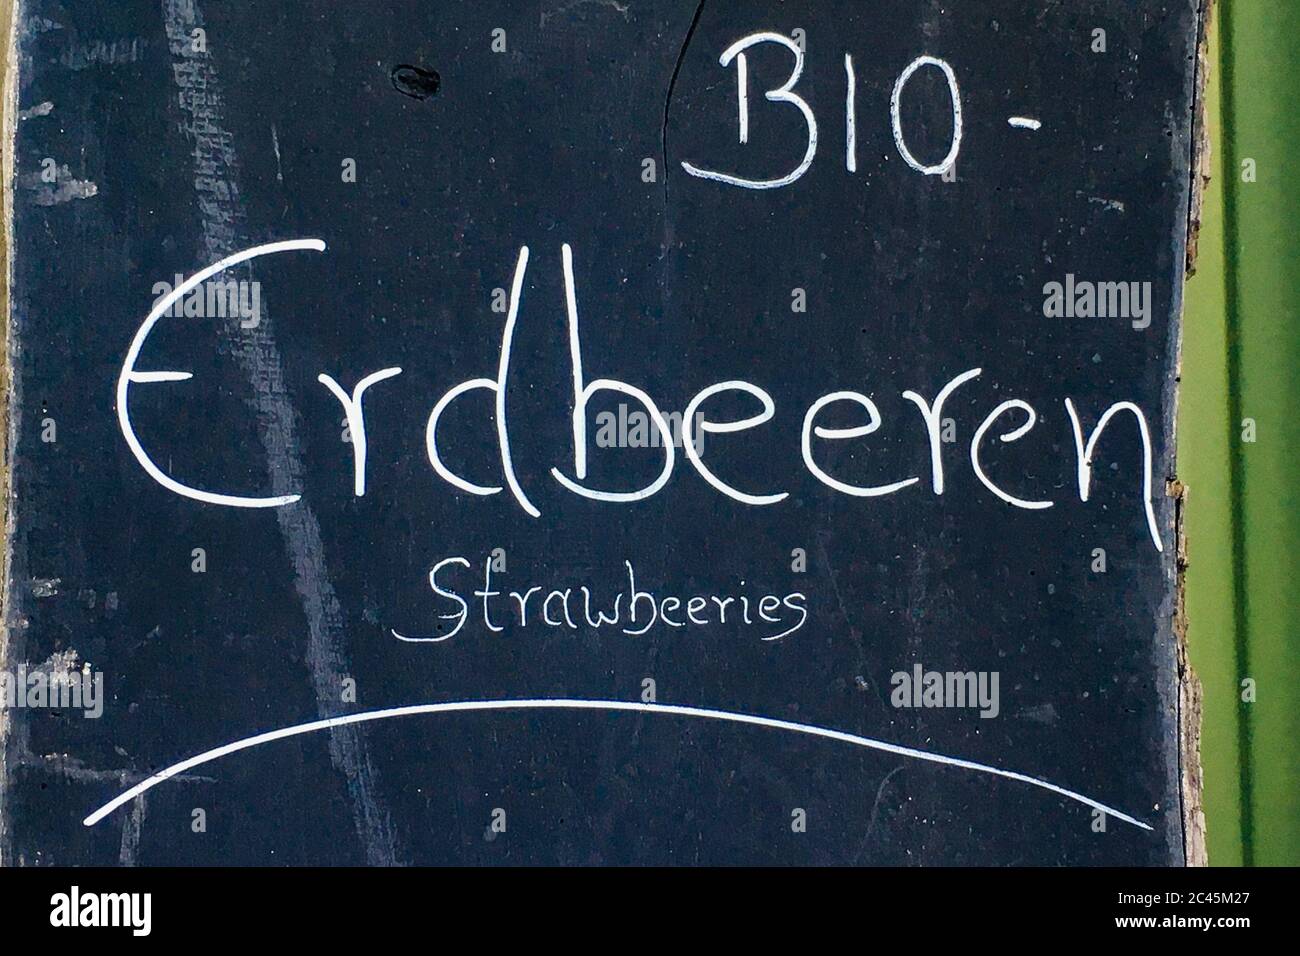 A sign with the inscription "Bio Erdbeeren" stands on a strawberry field Stock Photo